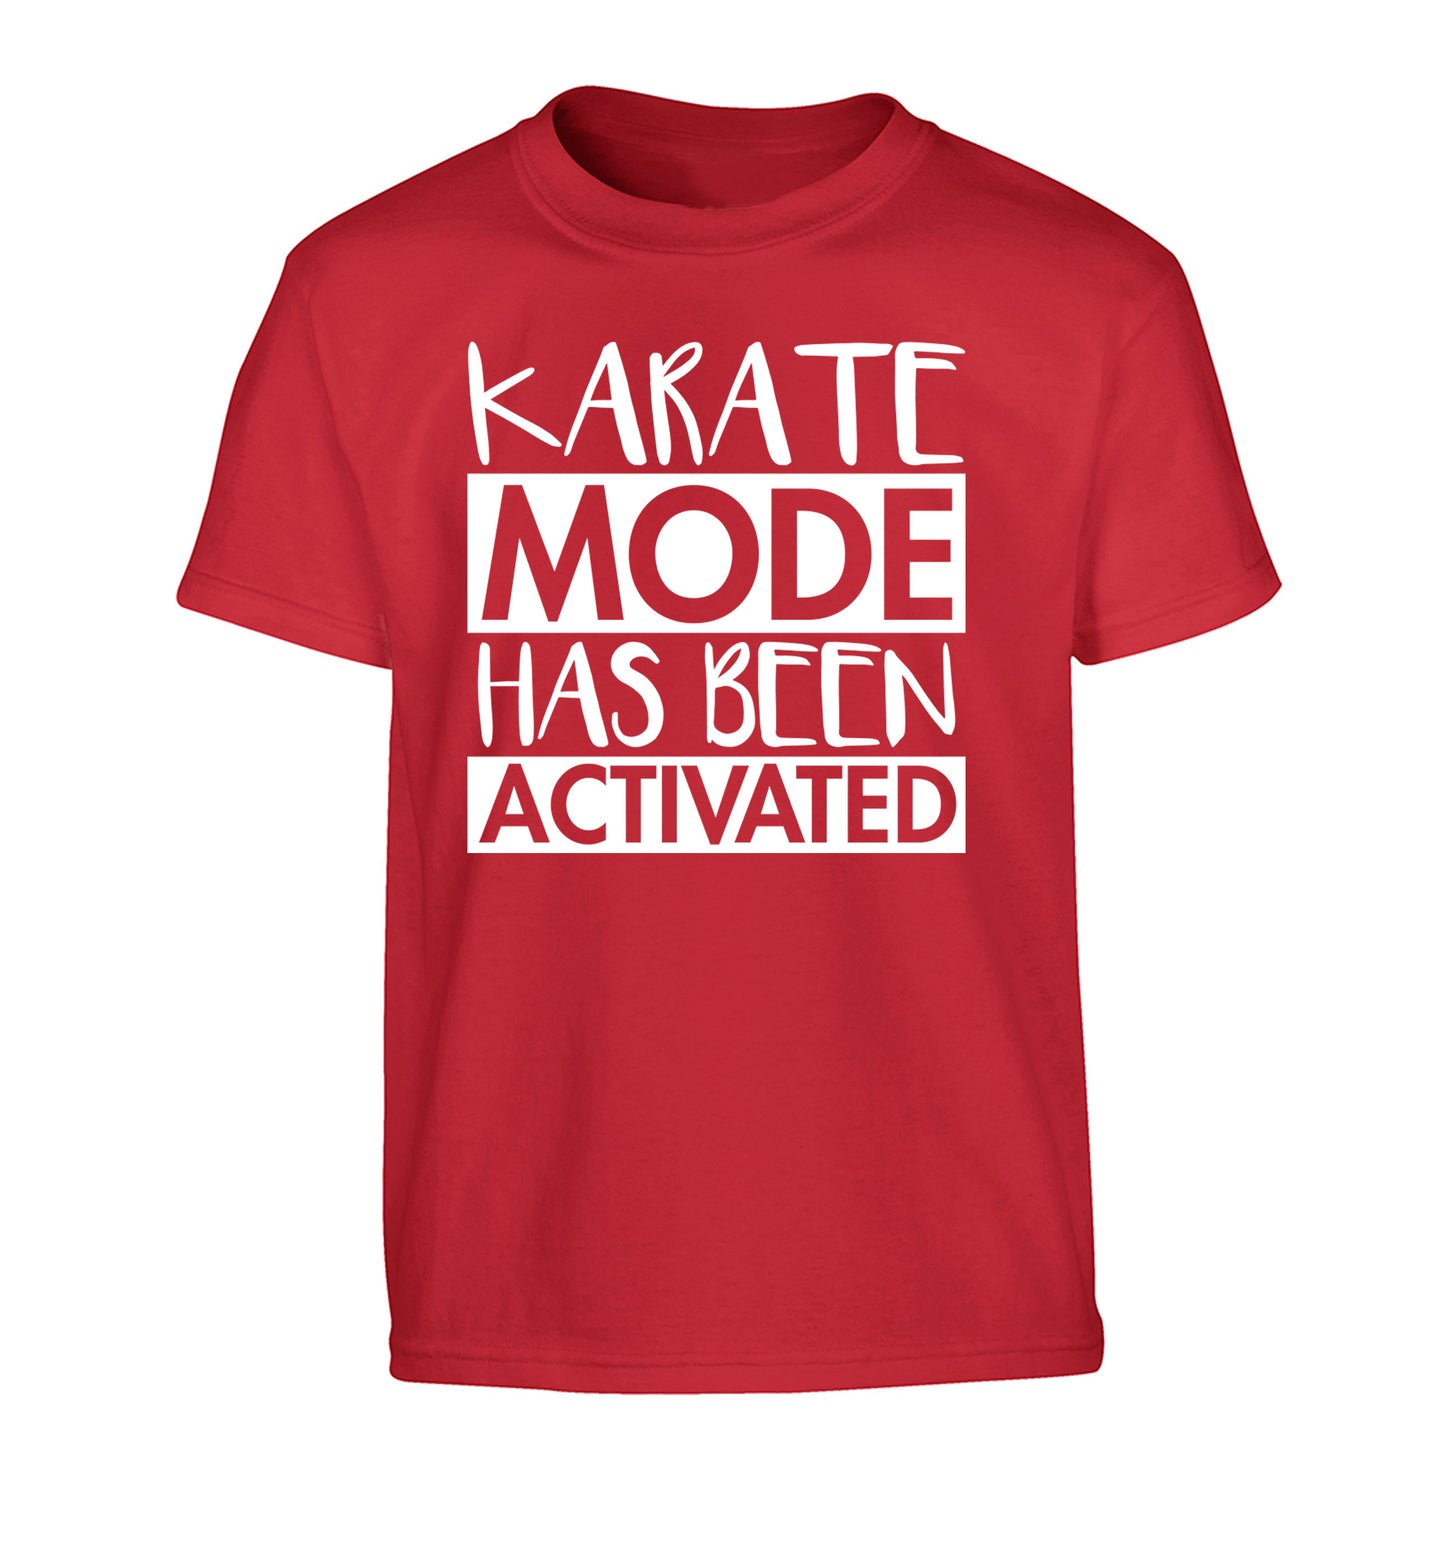 Karate mode activated Children's red Tshirt 12-14 Years